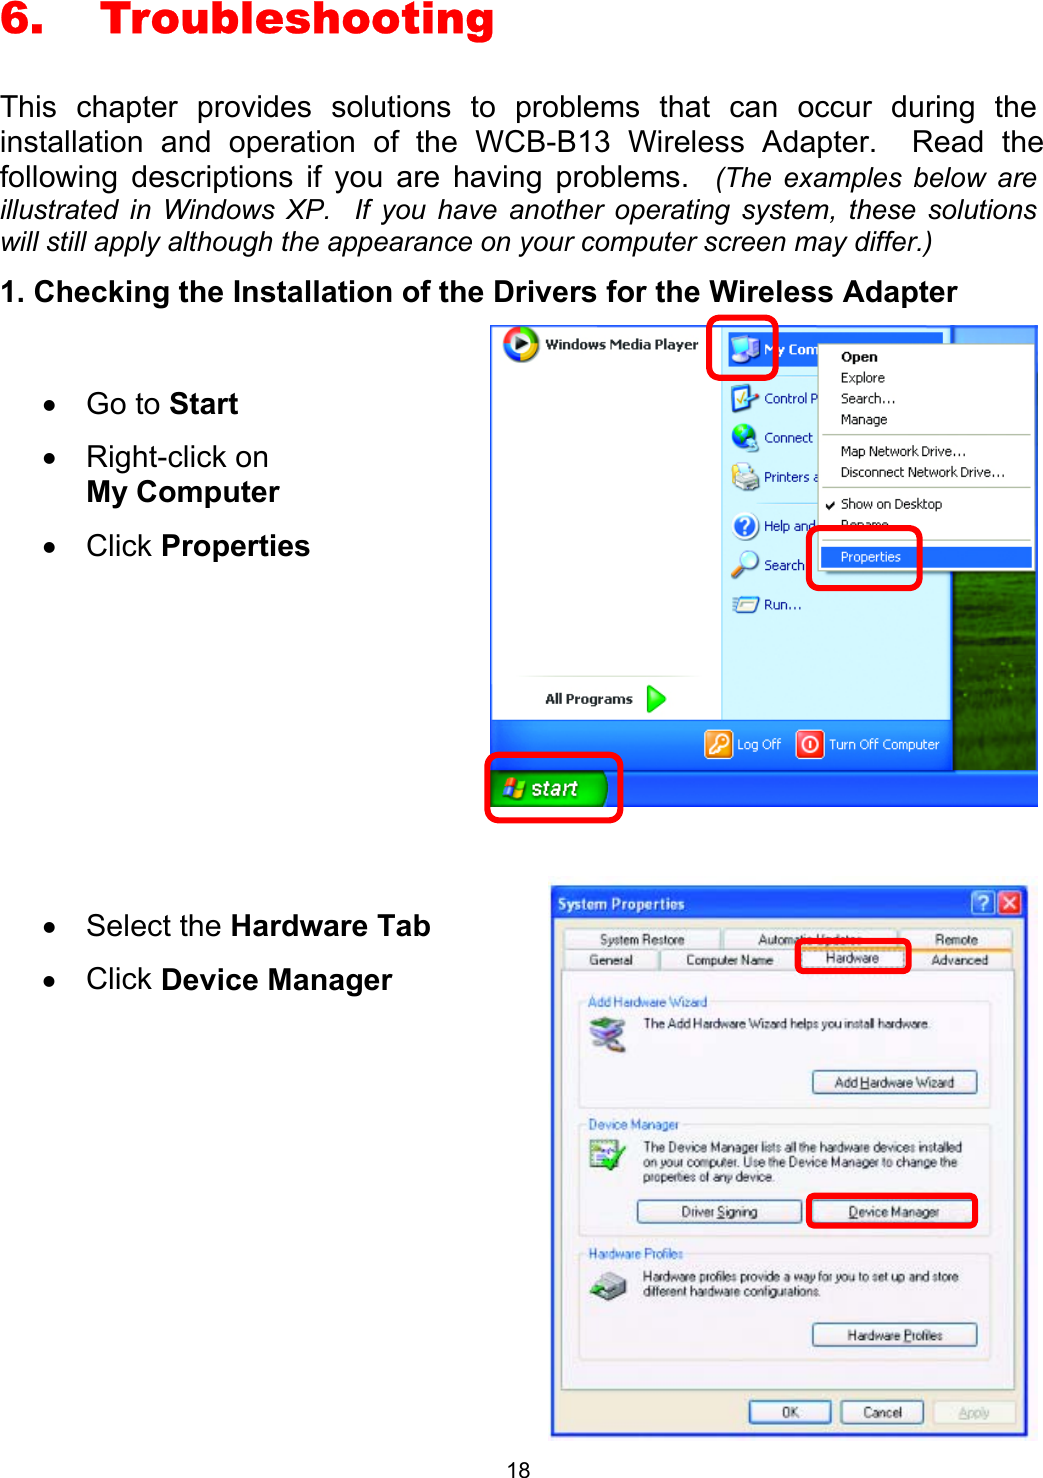  186. Troubleshooting This chapter provides solutions to problems that can occur during the installation and operation of the WCB-B13 Wireless Adapter.  Read the following descriptions if you are having problems.  (The examples below are illustrated in Windows XP.  If you have another operating system, these solutions will still apply although the appearance on your computer screen may differ.) 1. Checking the Installation of the Drivers for the Wireless Adapter      •  Go to Start •  Right-click on       My Computer  •  Click Properties  •  Select the Hardware Tab •  Click Device Manager   